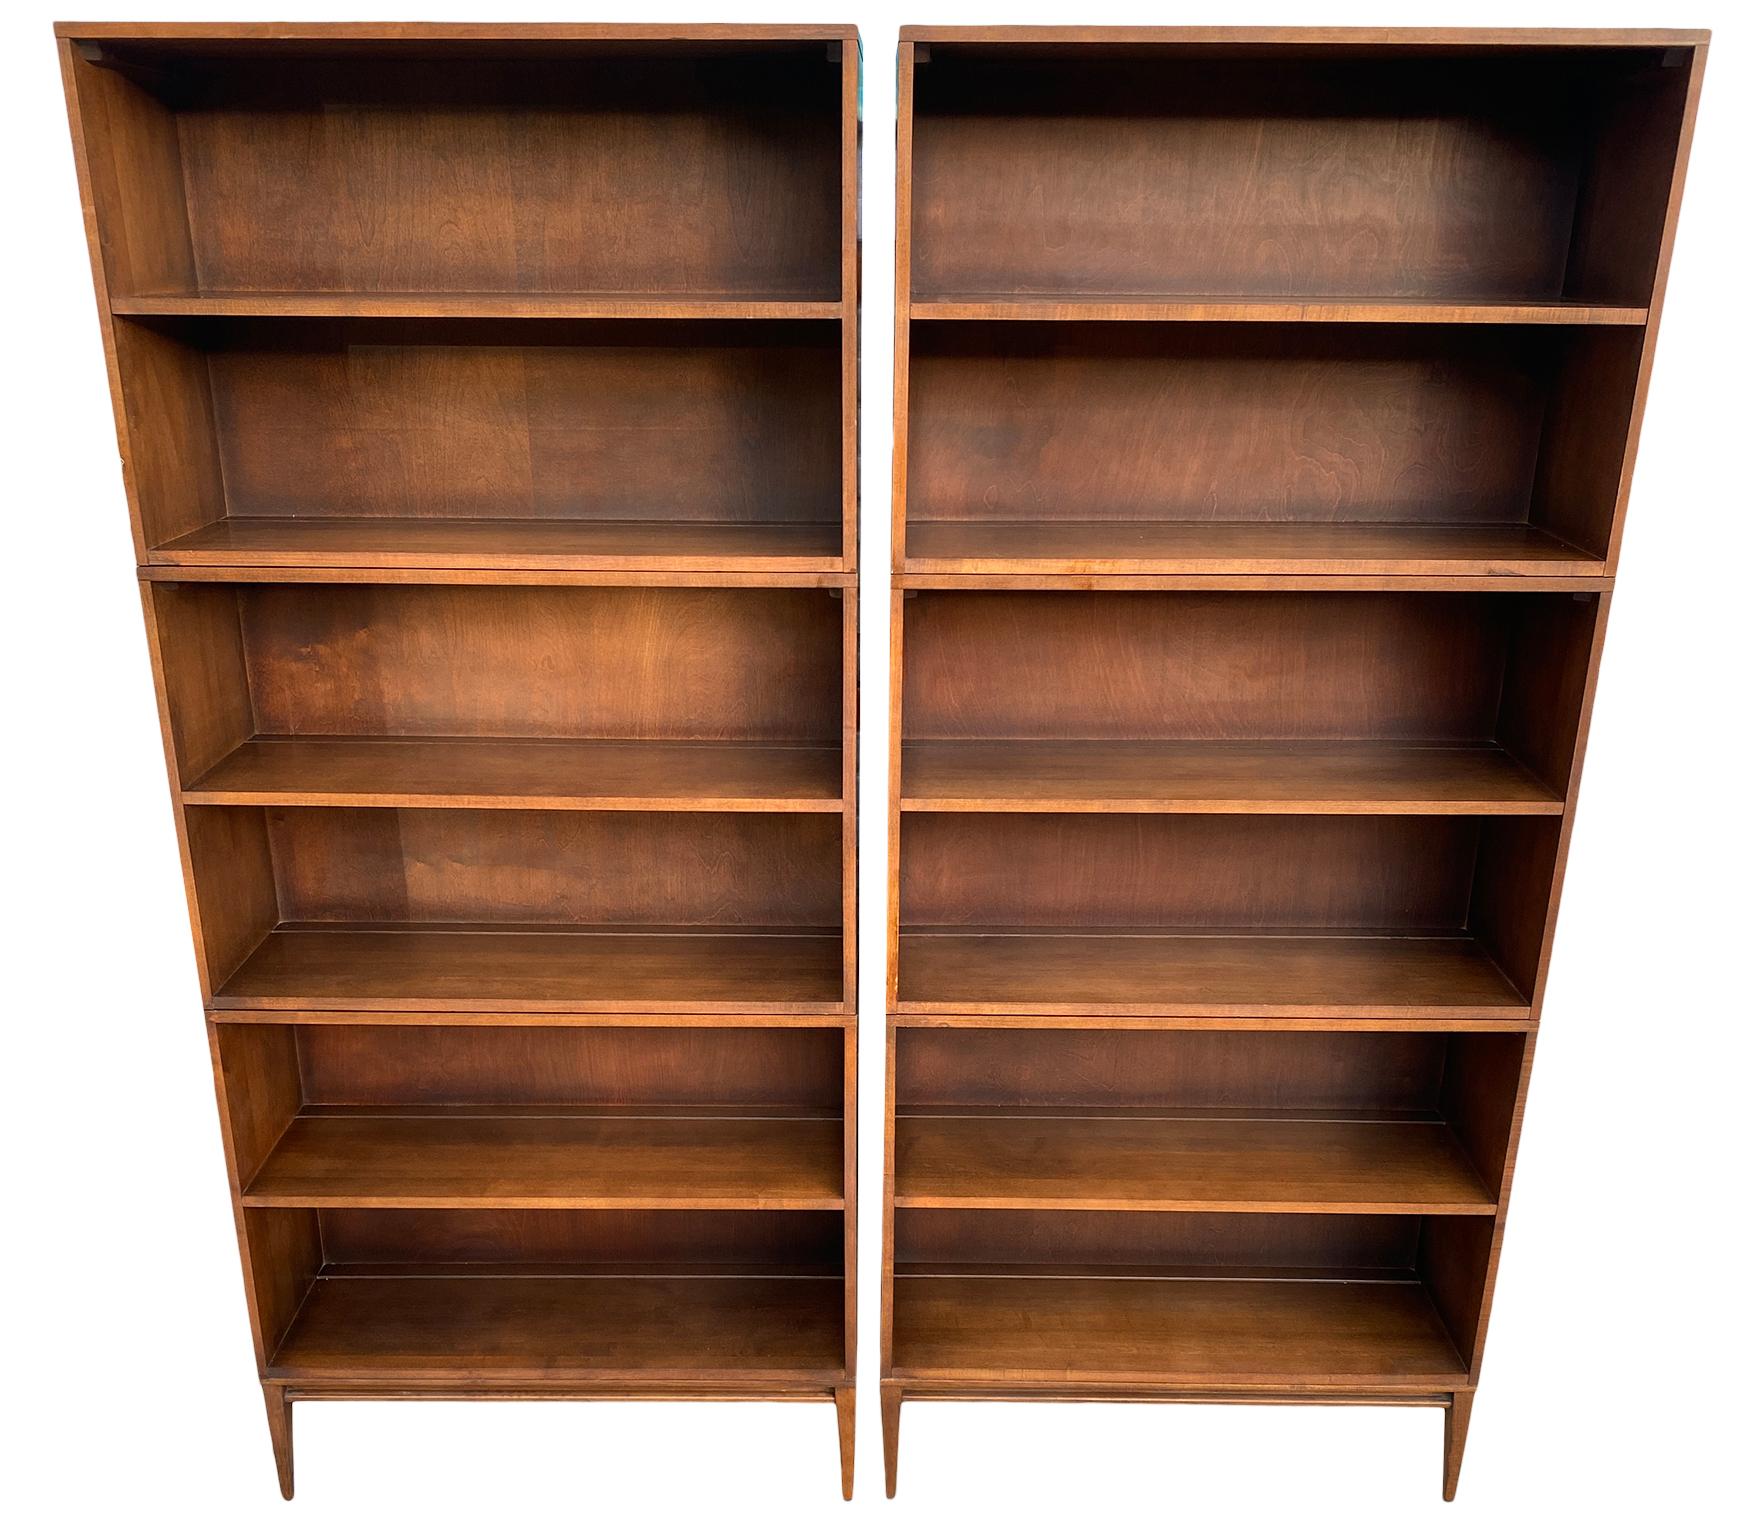 Pair of vintage midcentury Paul McCobb triple high bookcases bookshelves #1516 original walnut finish over solid maple with solid maple 4 leg base. Beautiful bookcase set by Paul McCobb, circa 1950s Planner Group, single center fixed shelf, solid